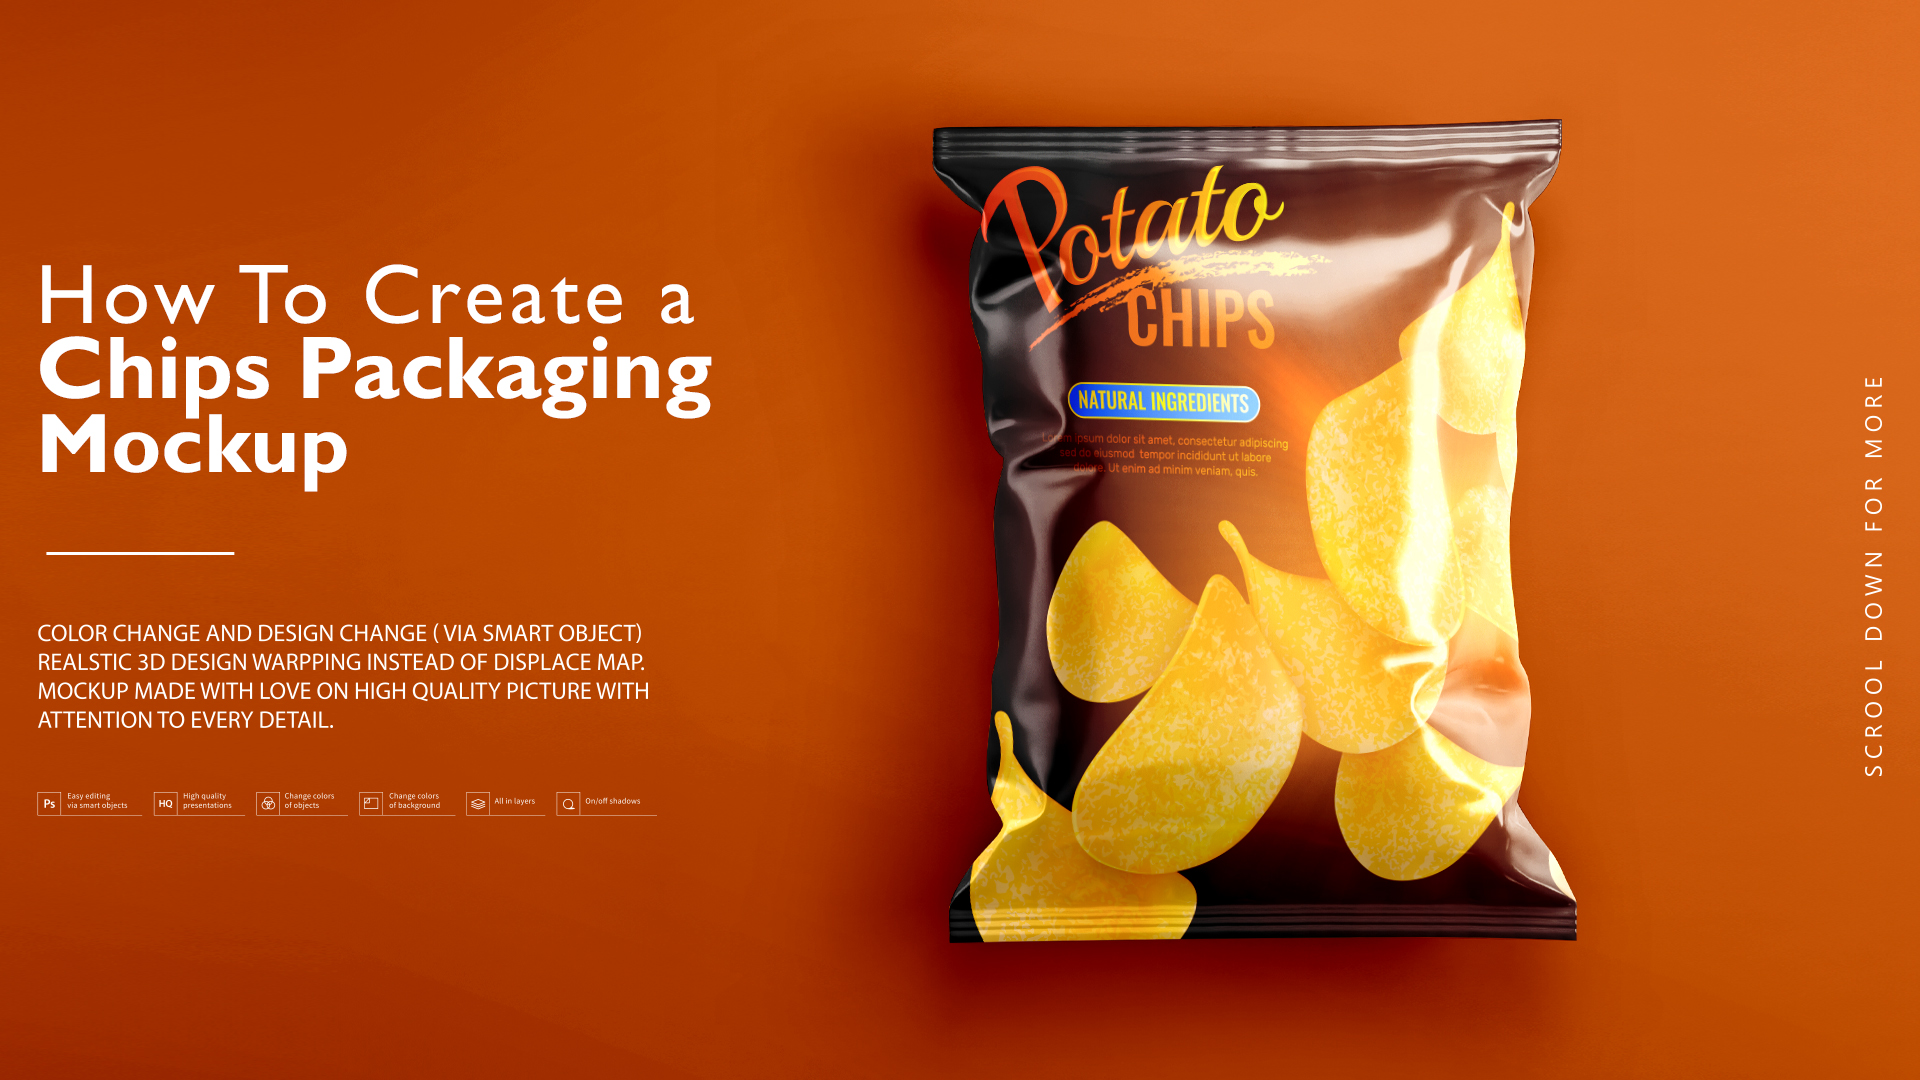 See Yourself Inside: Creating a bag of Lay's - PepsiCoJobs Stories